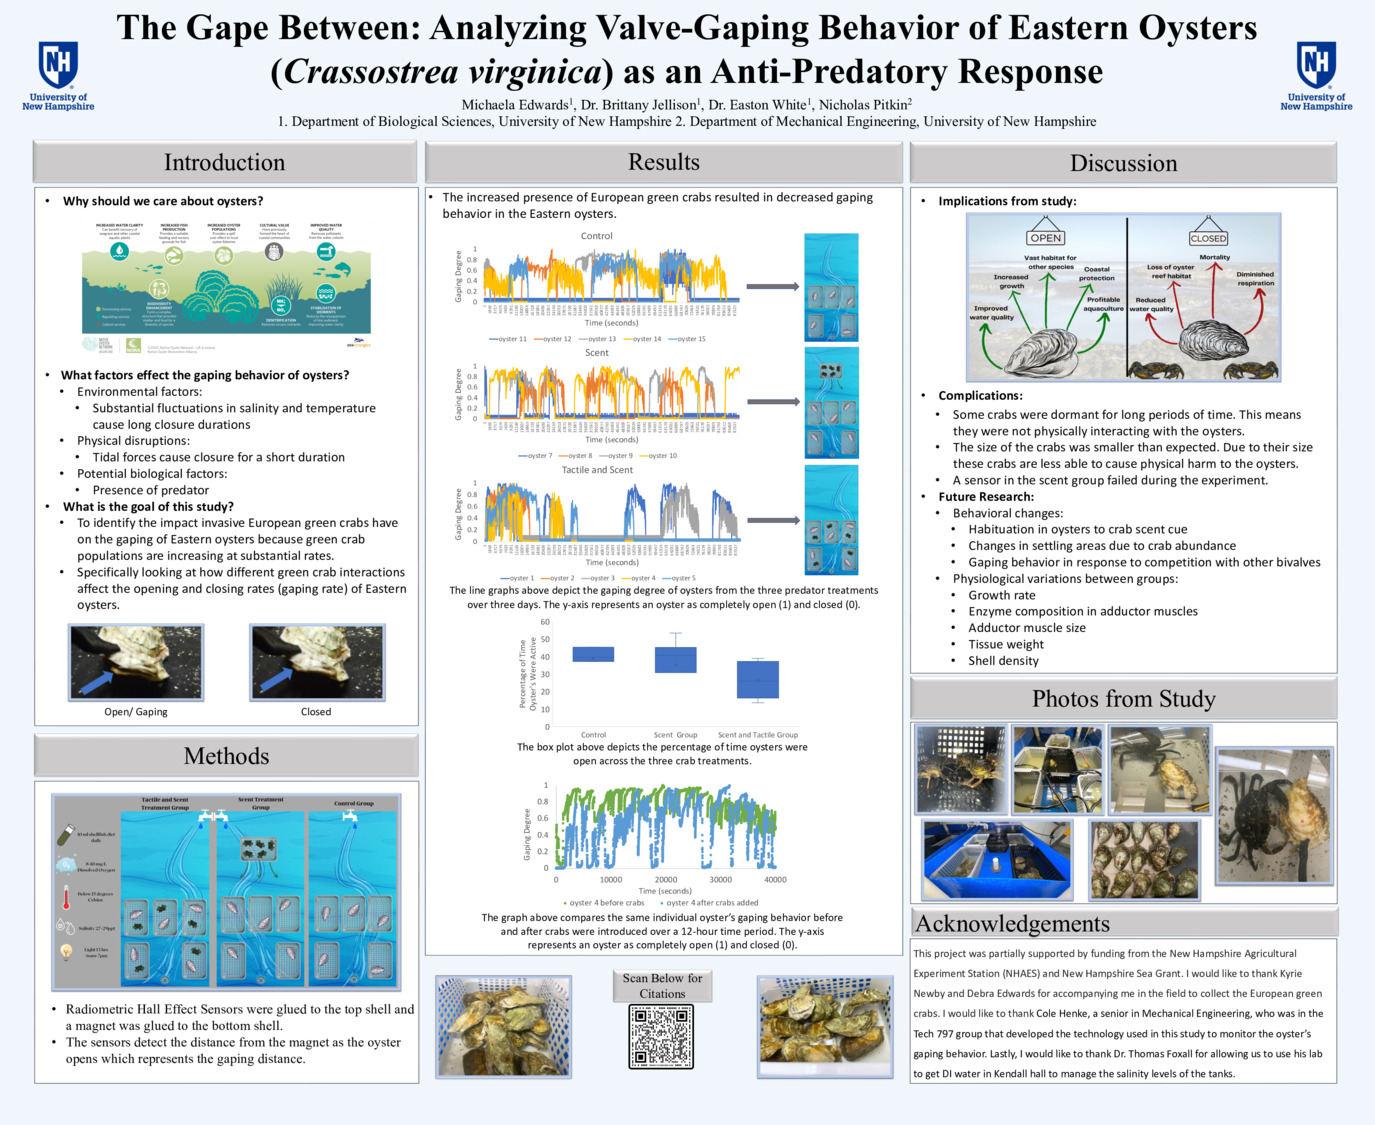 The Gape Between: Analyzing Valve-Gaping Behavior Of Eastern Oysters (Crassostrea Virginica) As An Anti-Predatory Response by mke1006